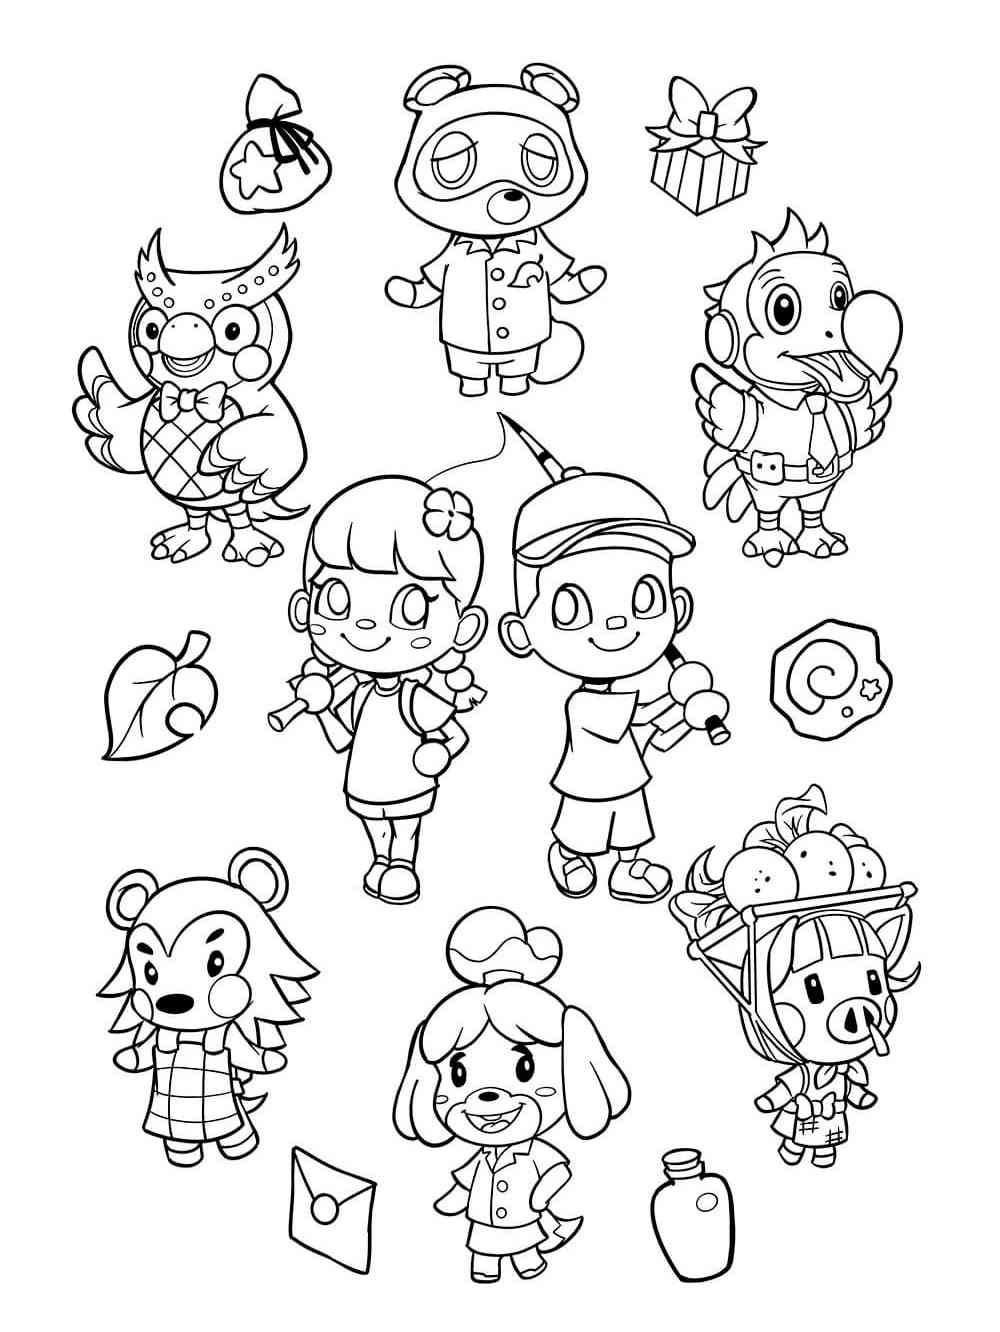 Animal Crossing characters coloring page